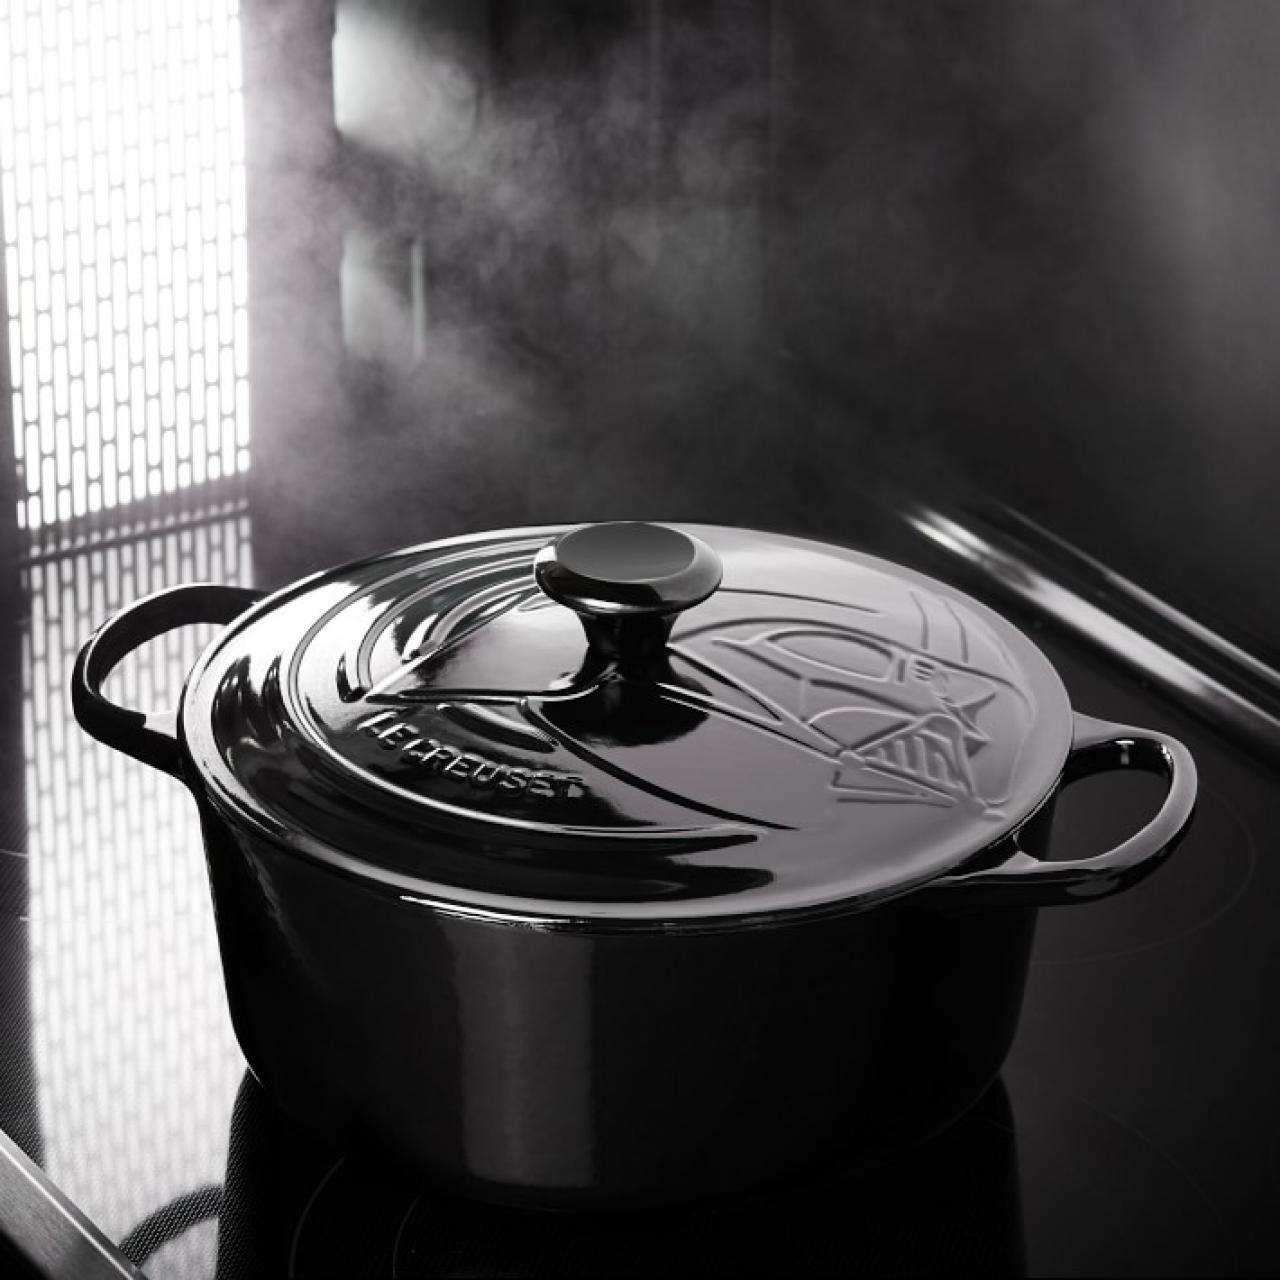 Star Wars' Instant Pot Can Join Your 'Star Wars' Le Creuset Dutch